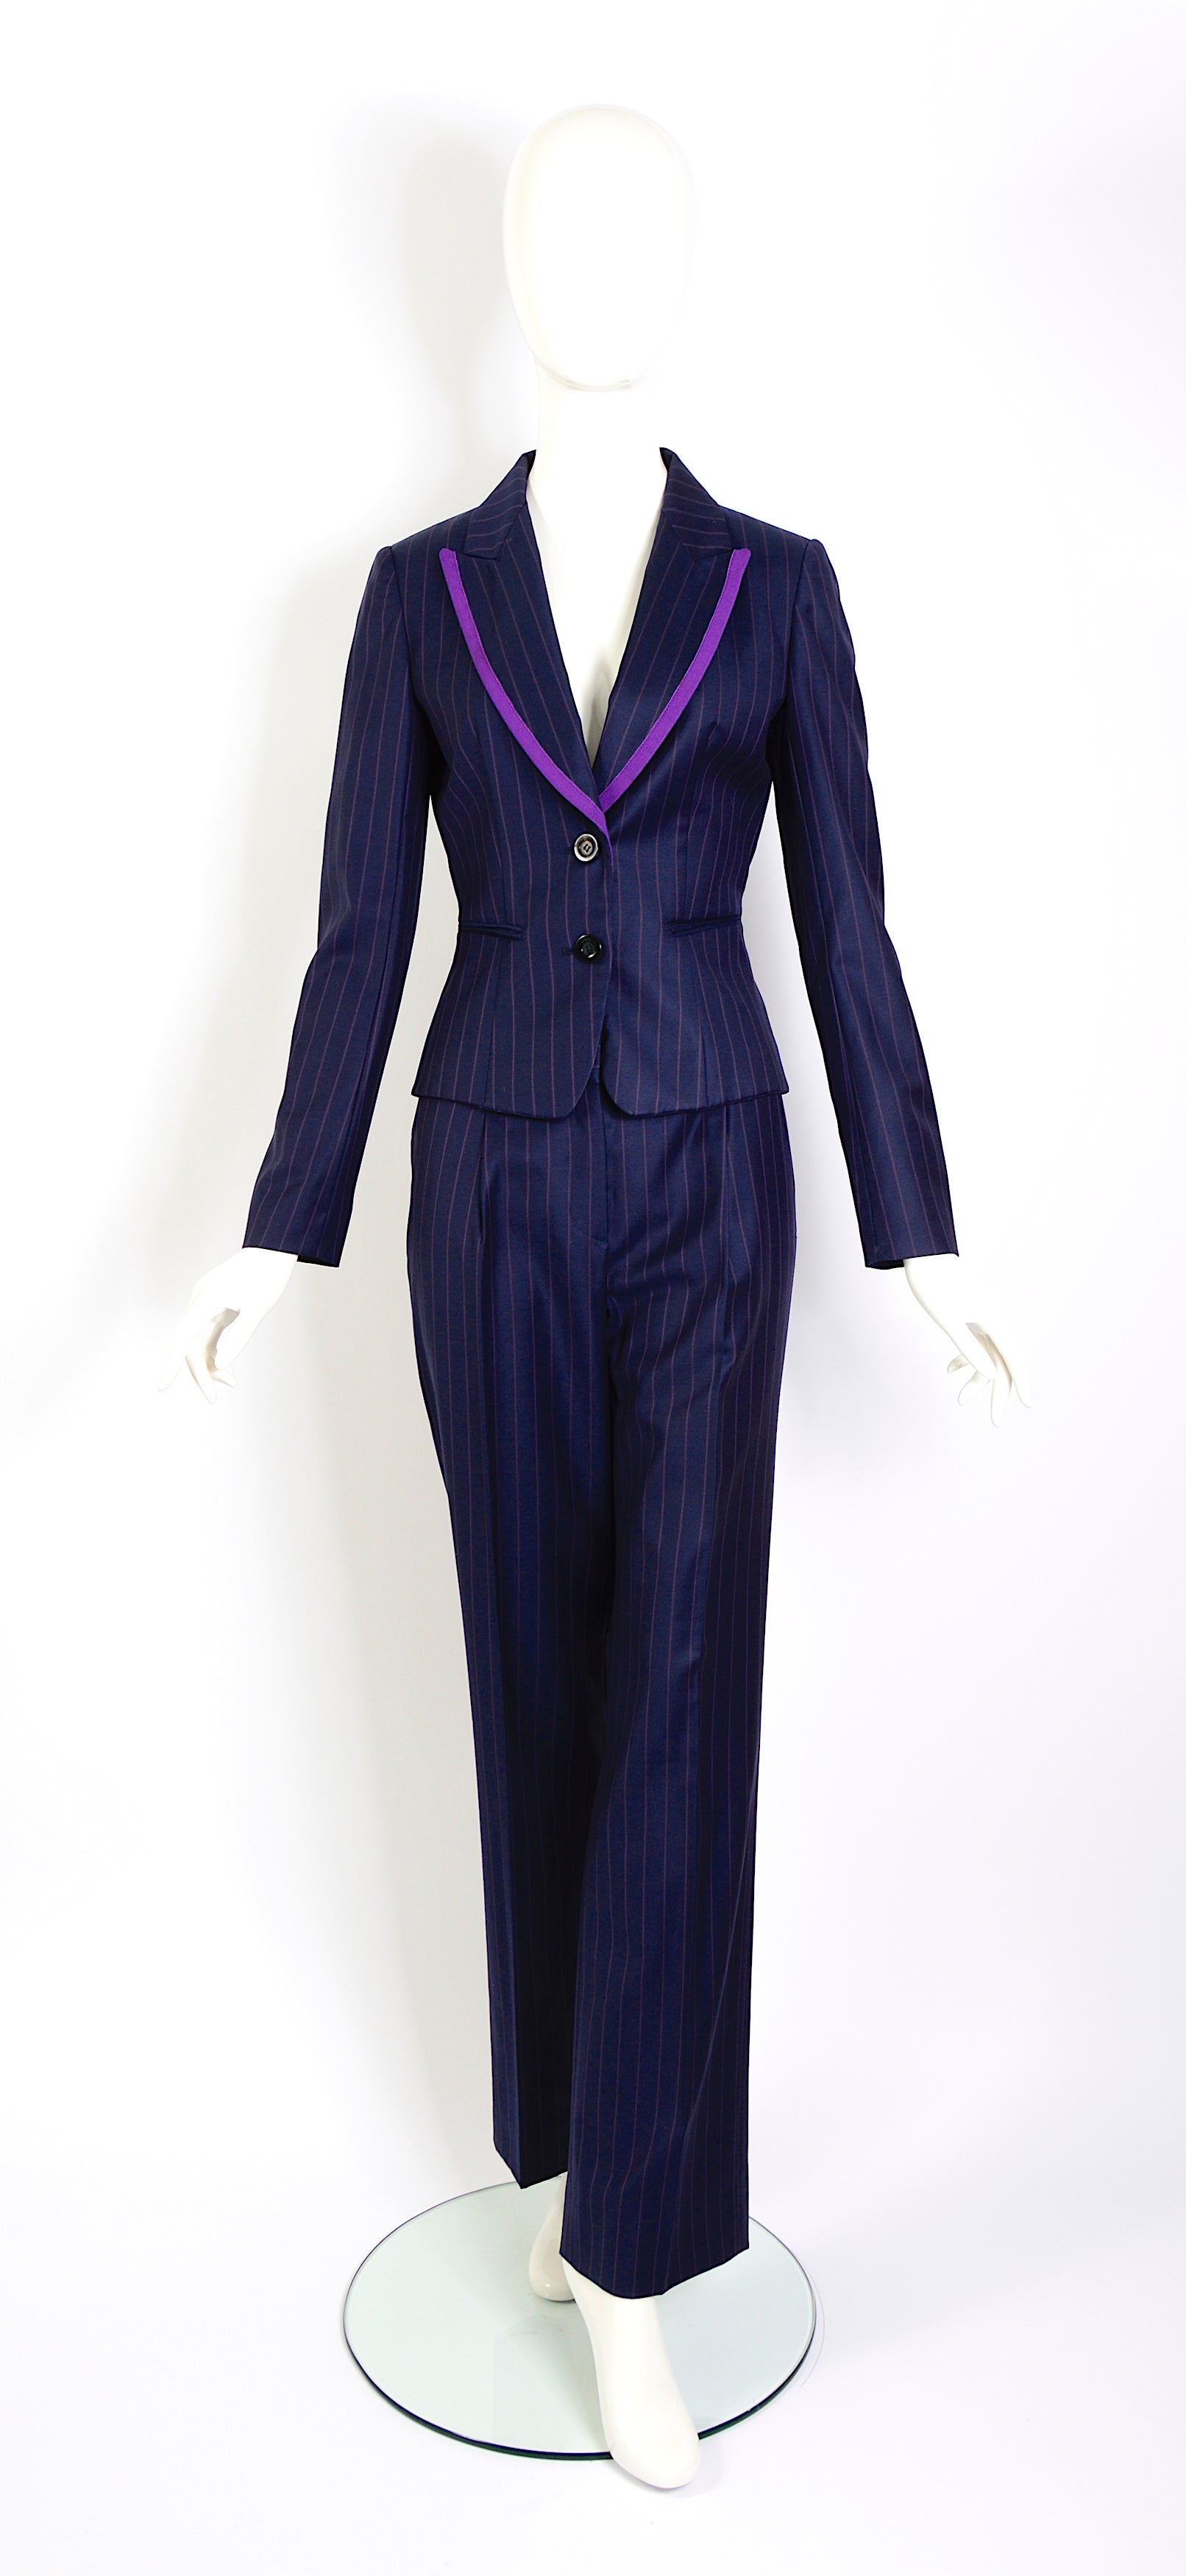 Adorable pinstriped suit by John Galliano for Christian Dior.
Slide pockets on the trousers.
It appears to have been very little worn. Excellent condition.
Size: French 38 - US 6 - Italian 42 - UK 30
Pictured without pinning the jacket and trousers